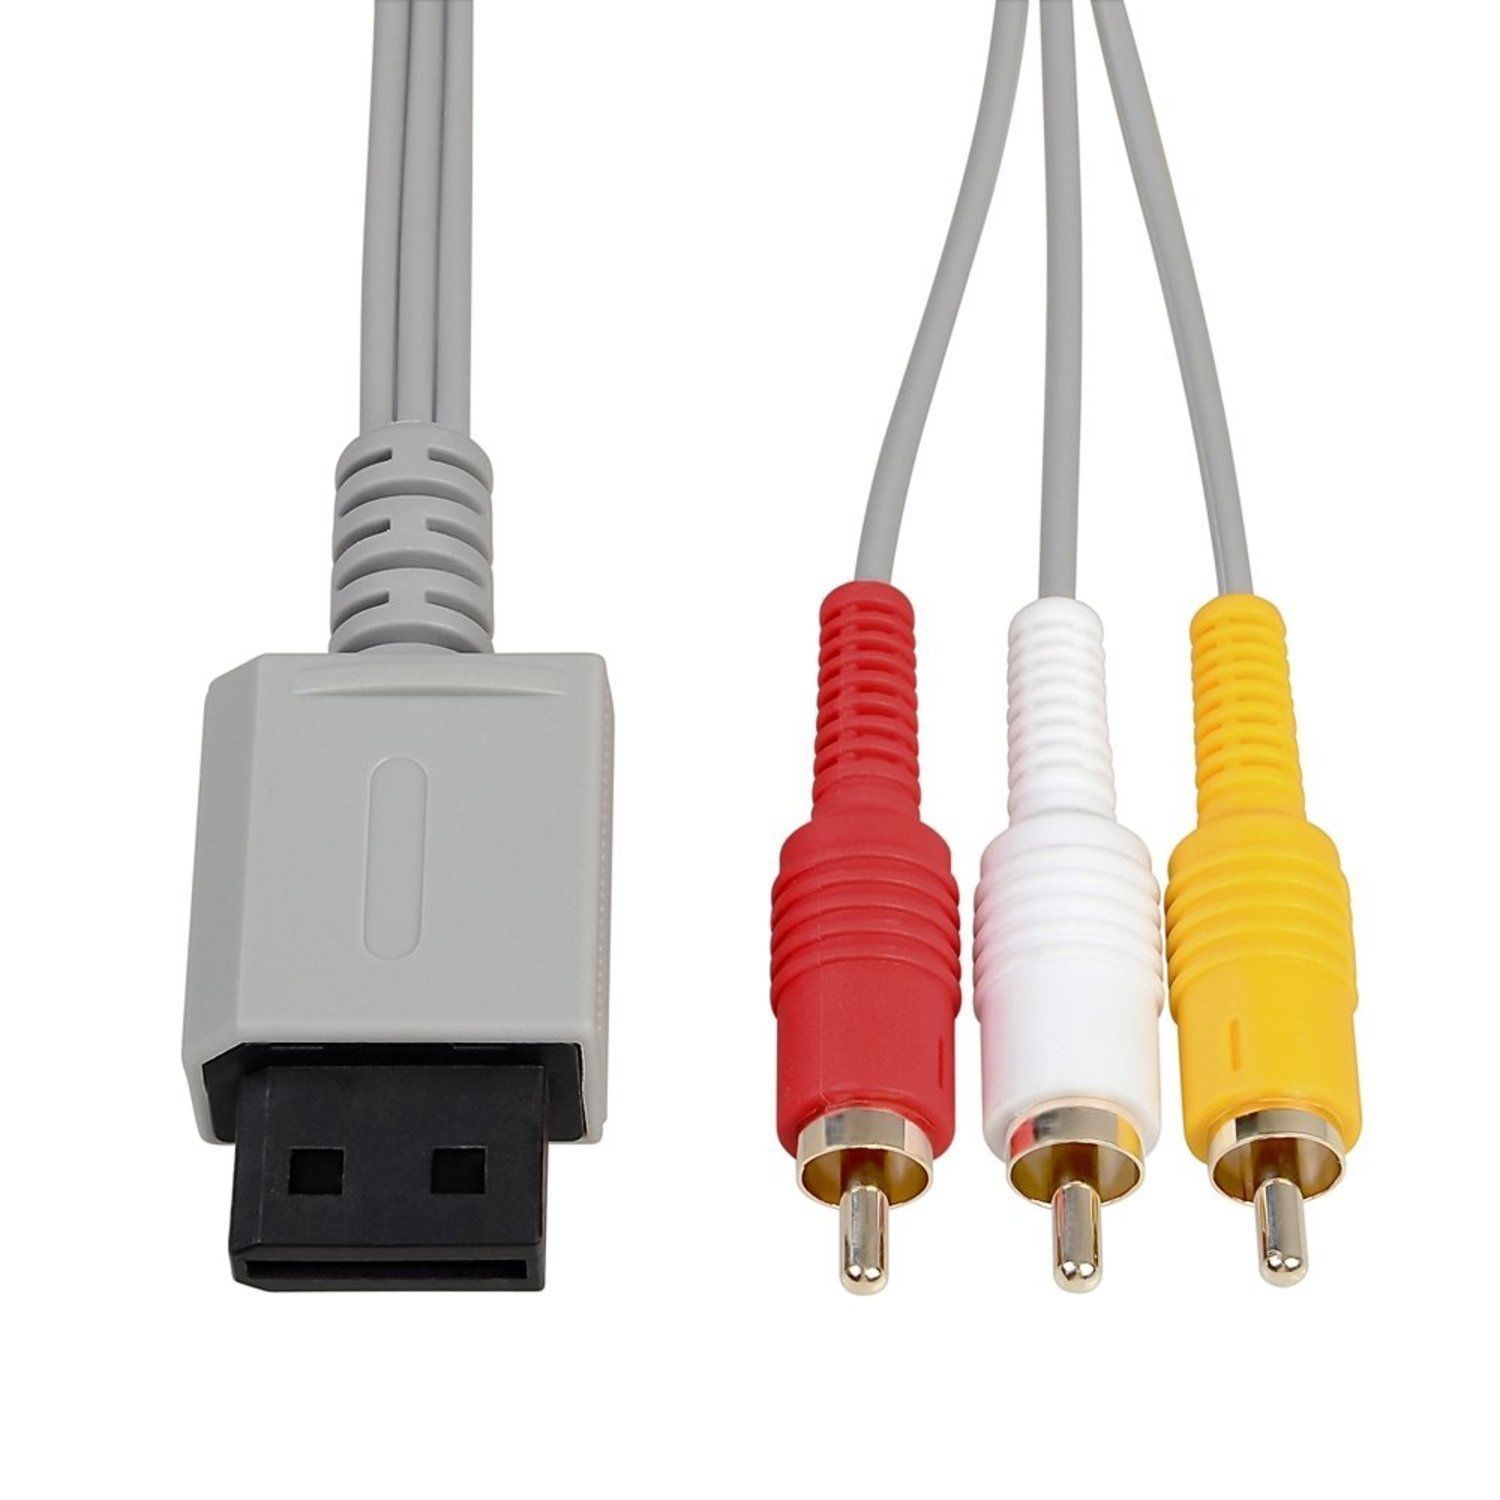 CableVantage Audio Video AV Composite 3 RCA Cable for Nintendo Wii NEW US SELLER - image 2 of 2